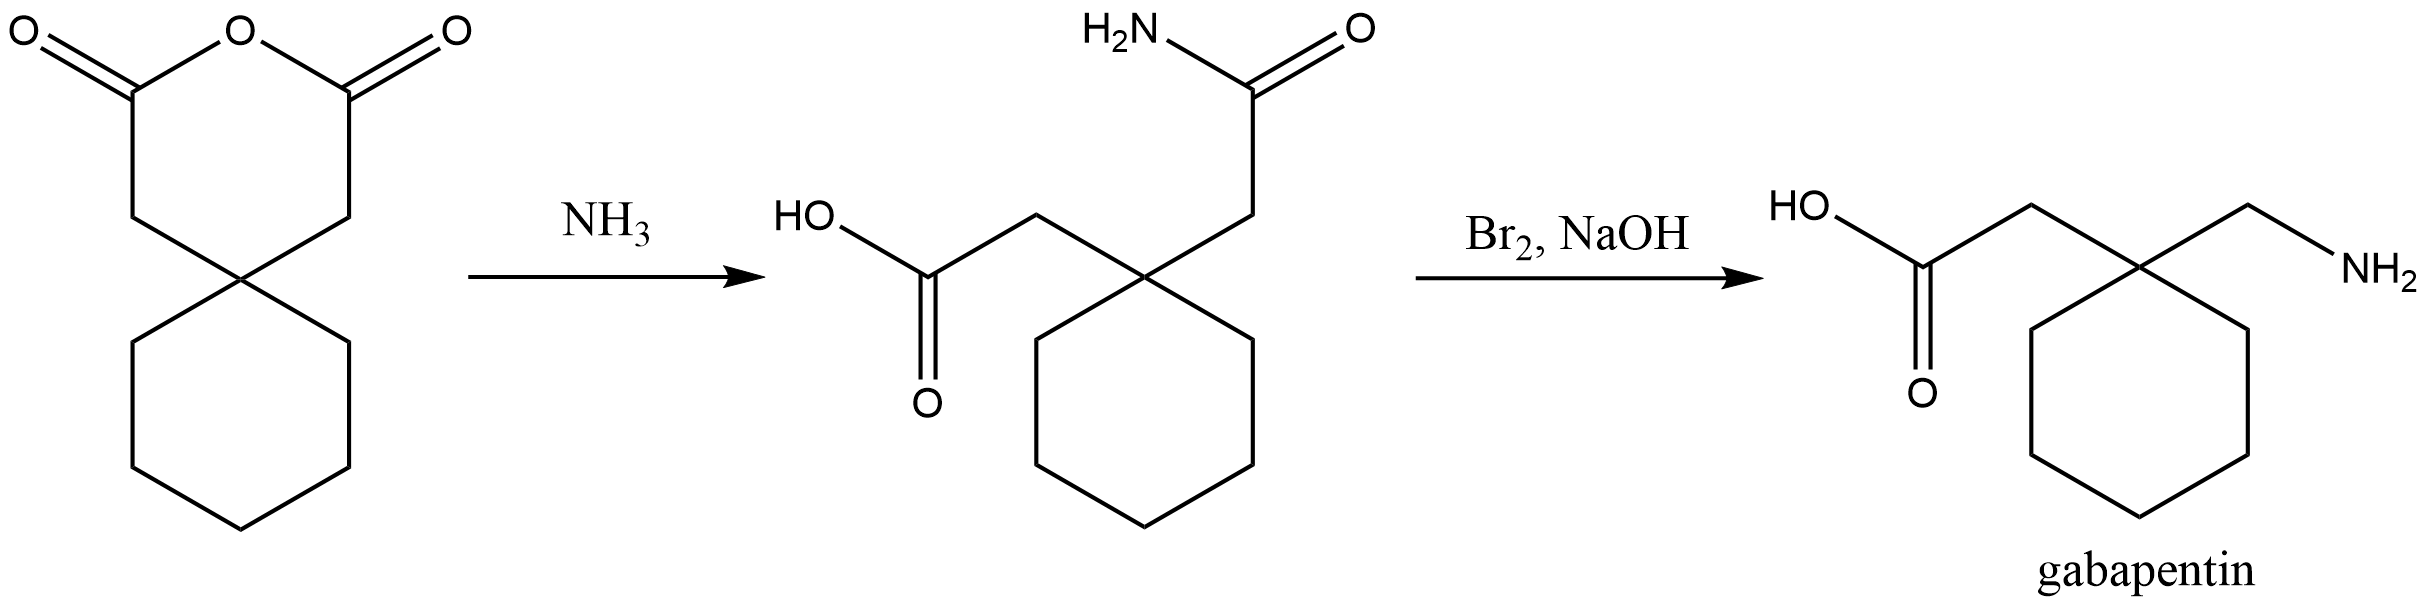 Synthesis of Gabapentin